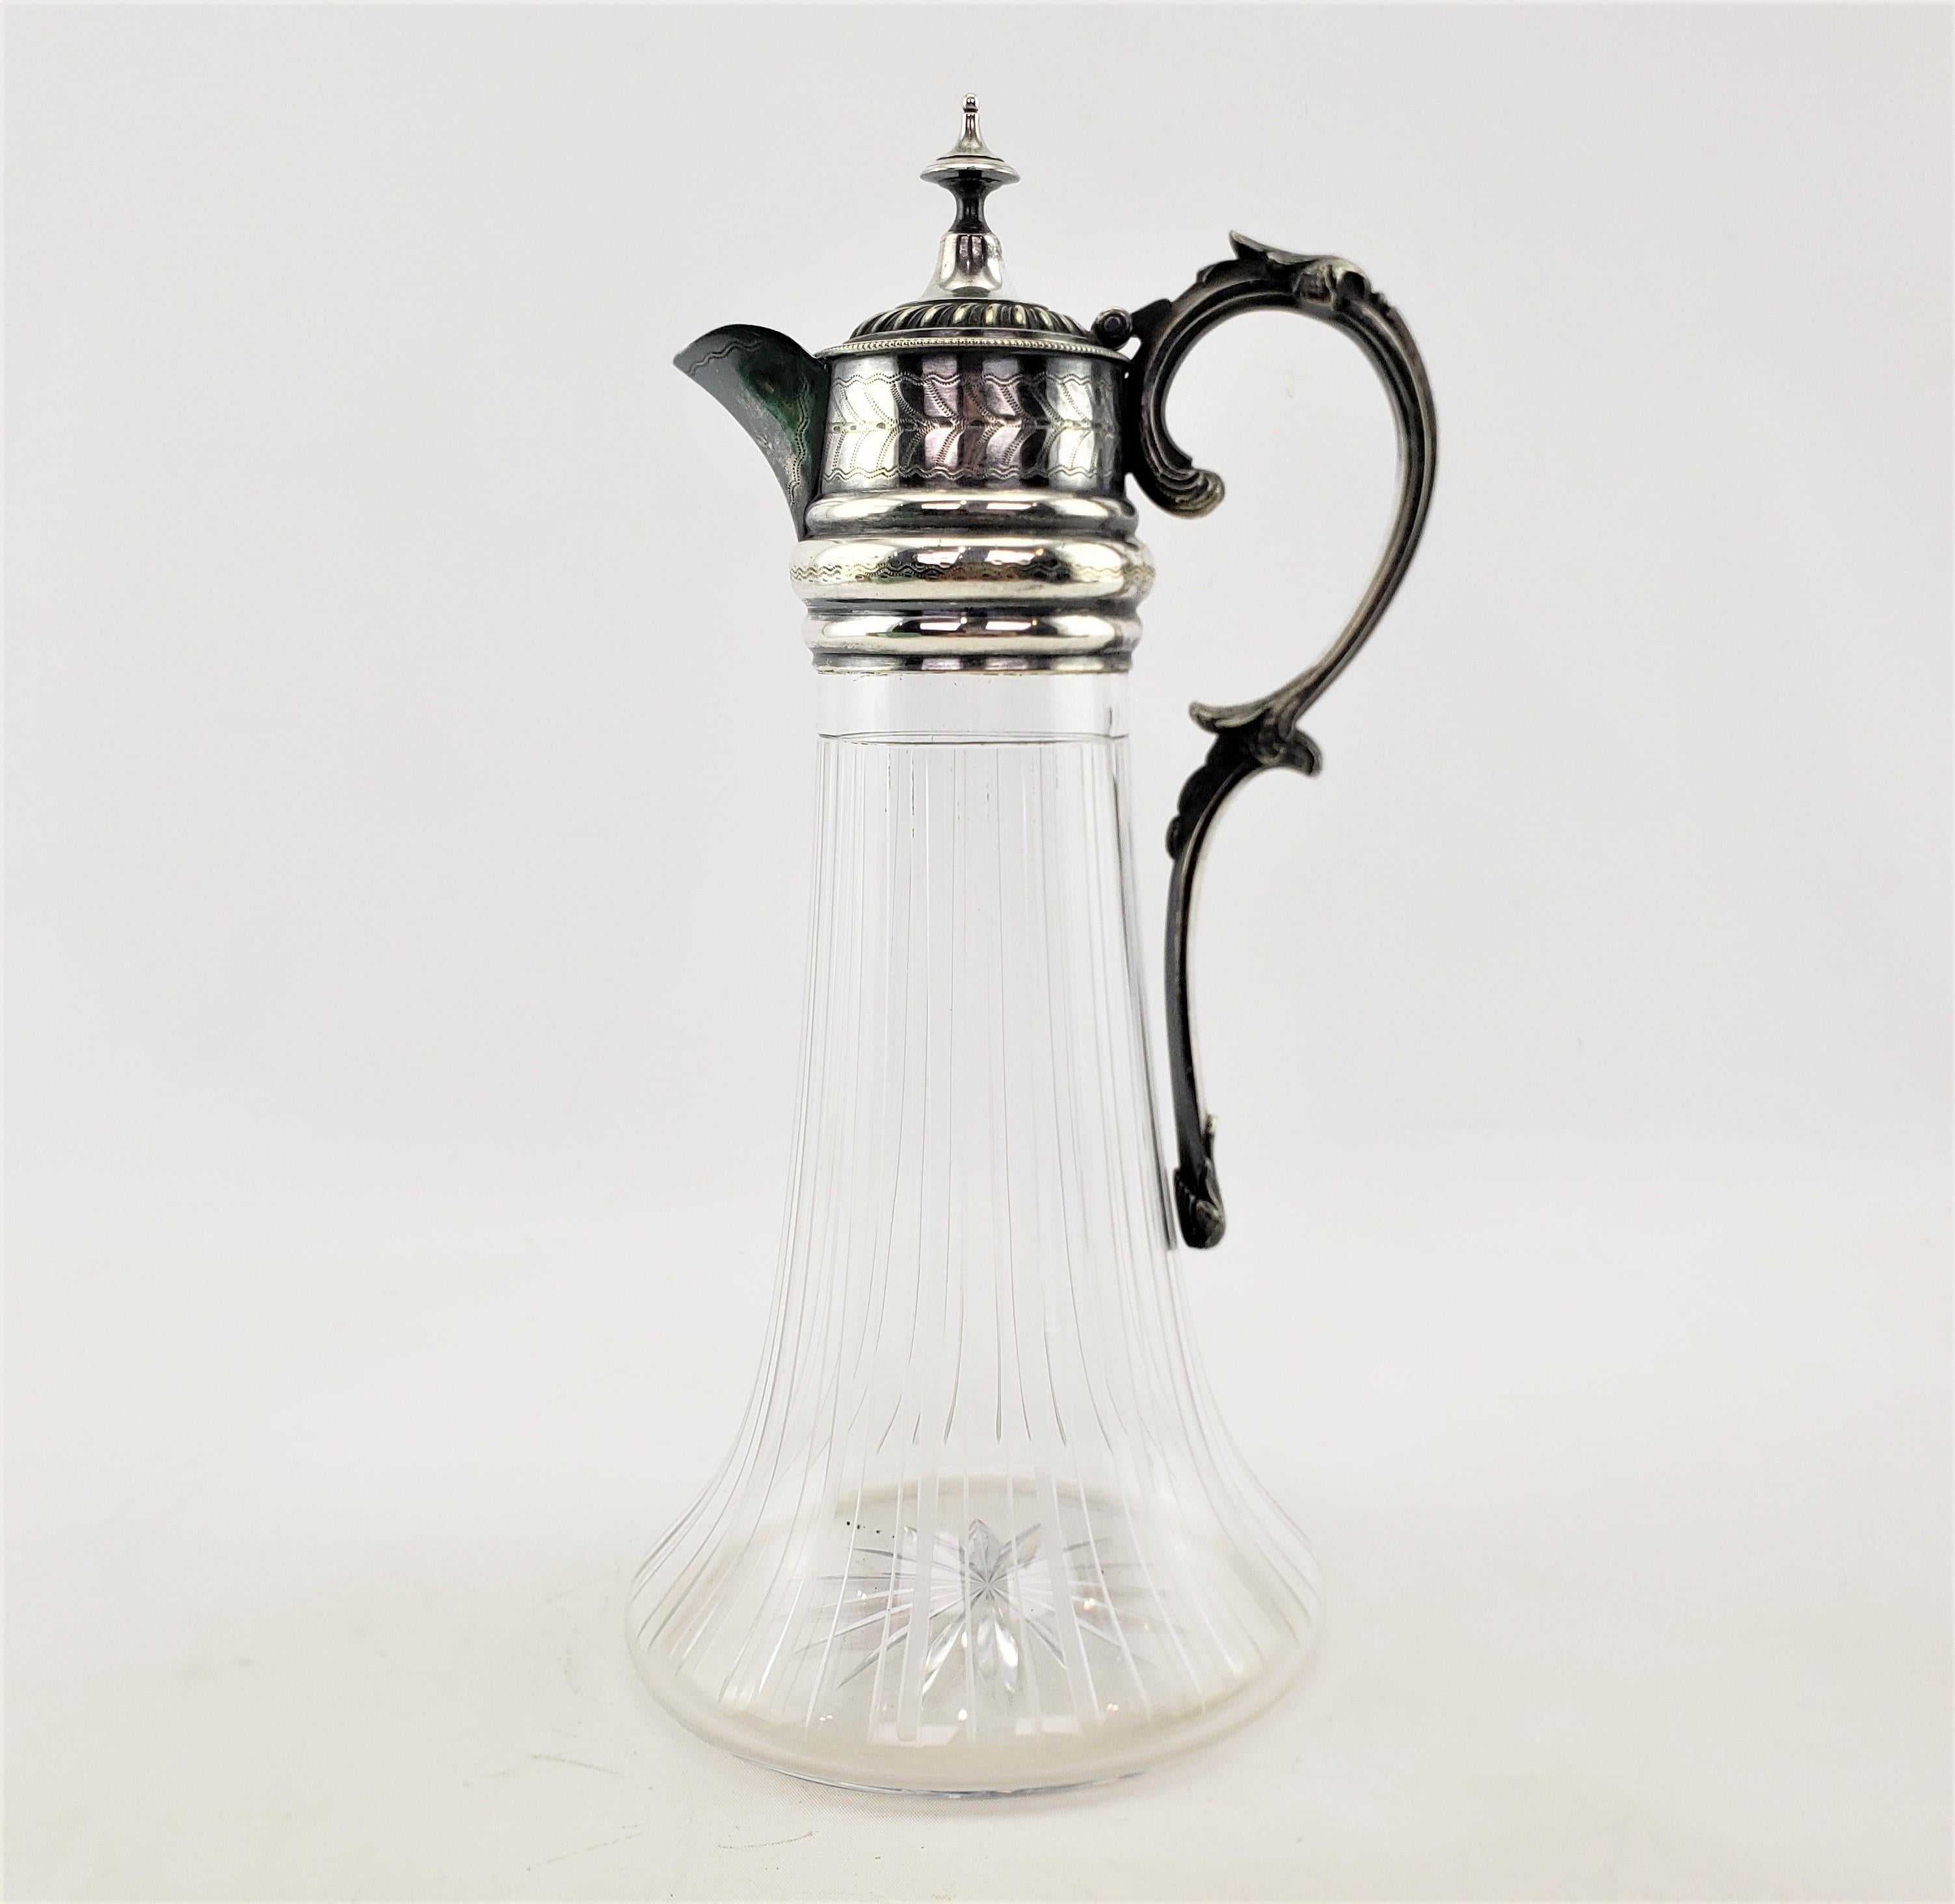 Antique English Cut Crystal & Silver Plated Claret Jug or Decanter In Good Condition For Sale In Hamilton, Ontario